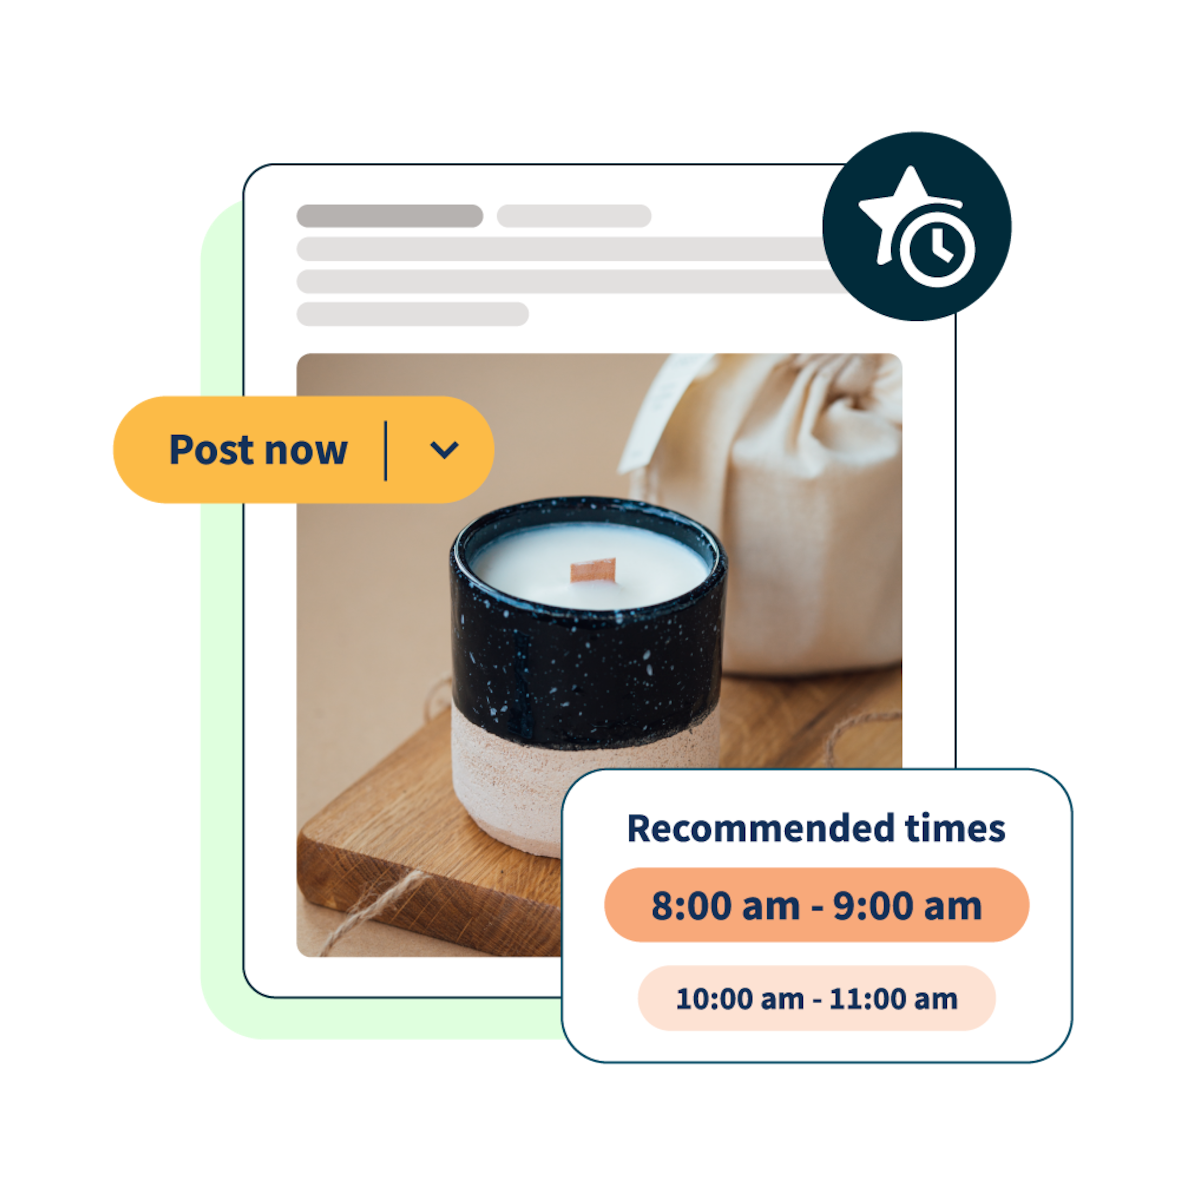 image of a candle accompanied by 2 pop-ups saying "post now" and "recommended times"